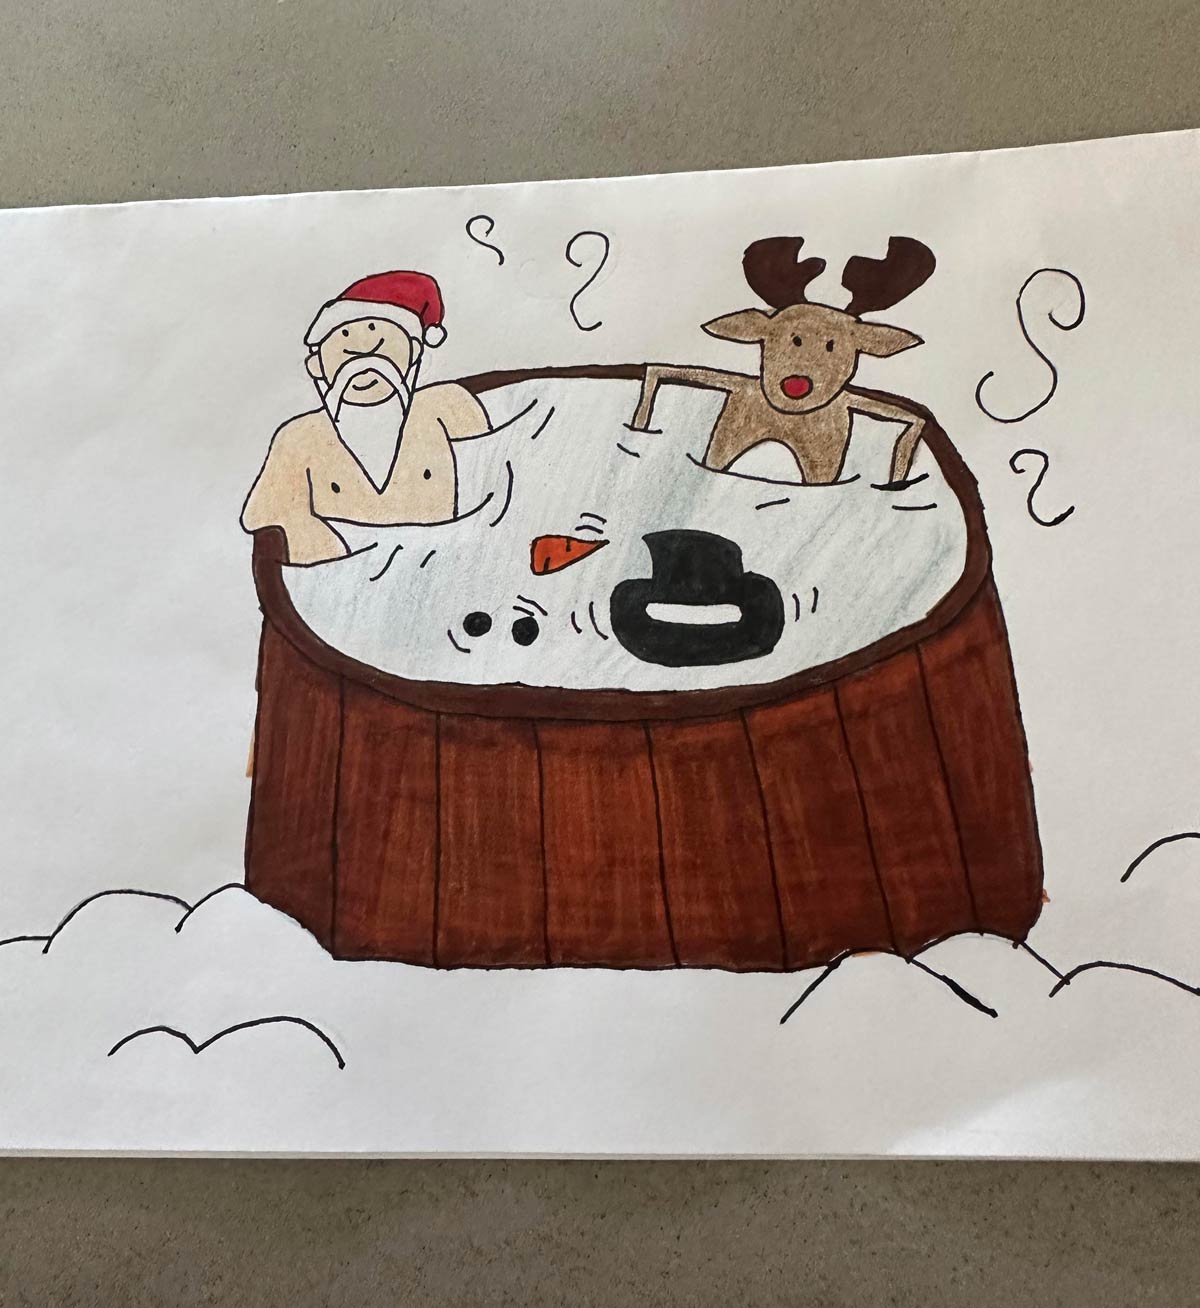 A card my daughter made. Santa, a reindeer and a melted snowman!